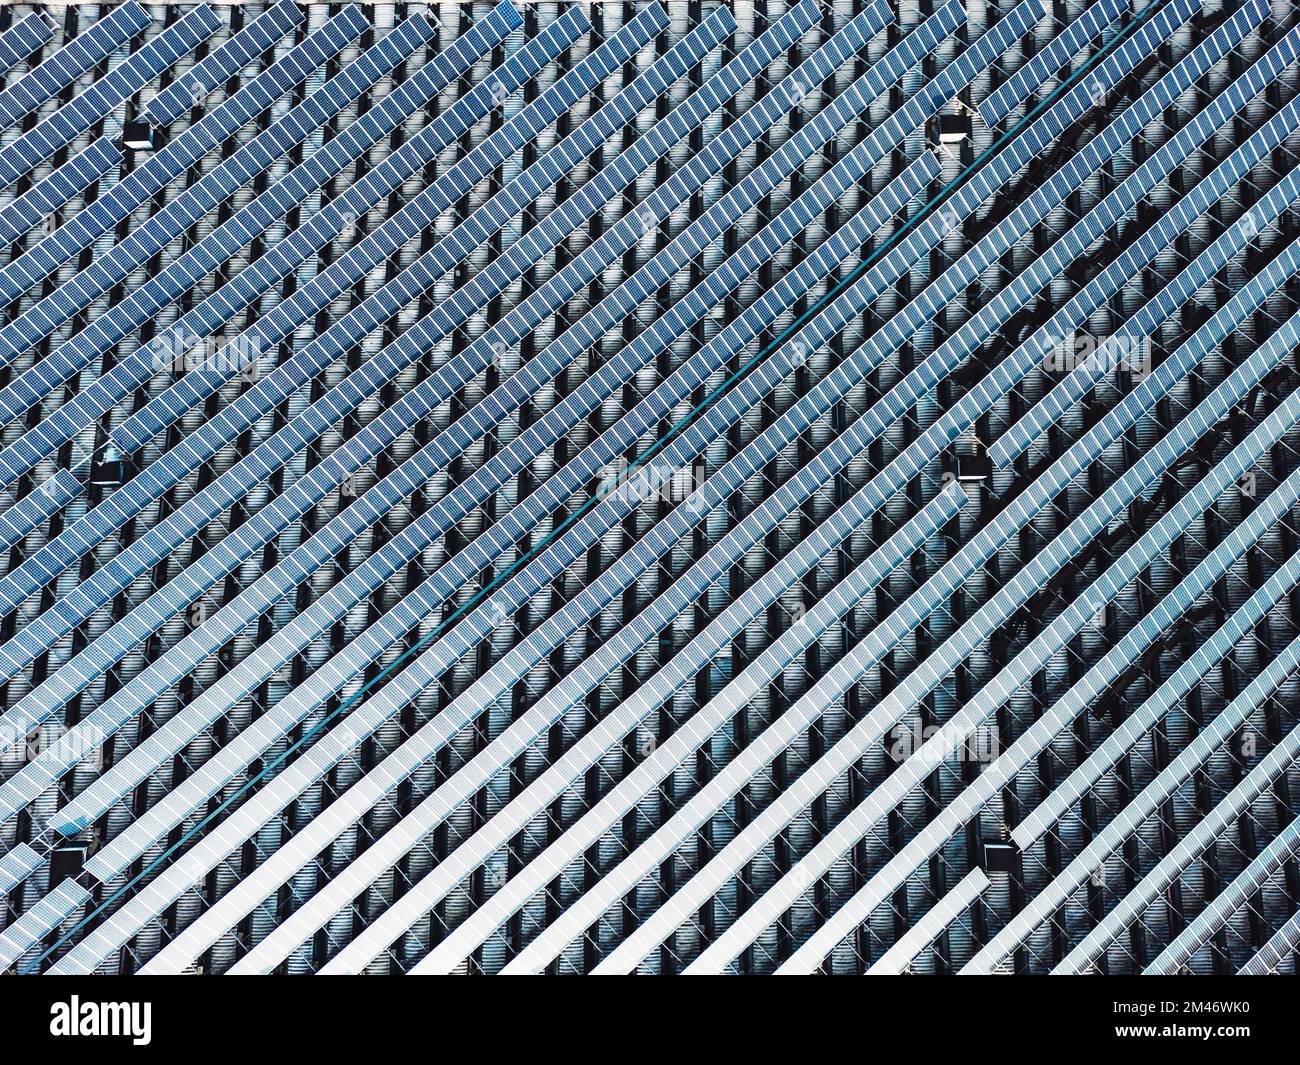 Never ending view of solar panels stacked in lines on the rooftop  Stock Photo